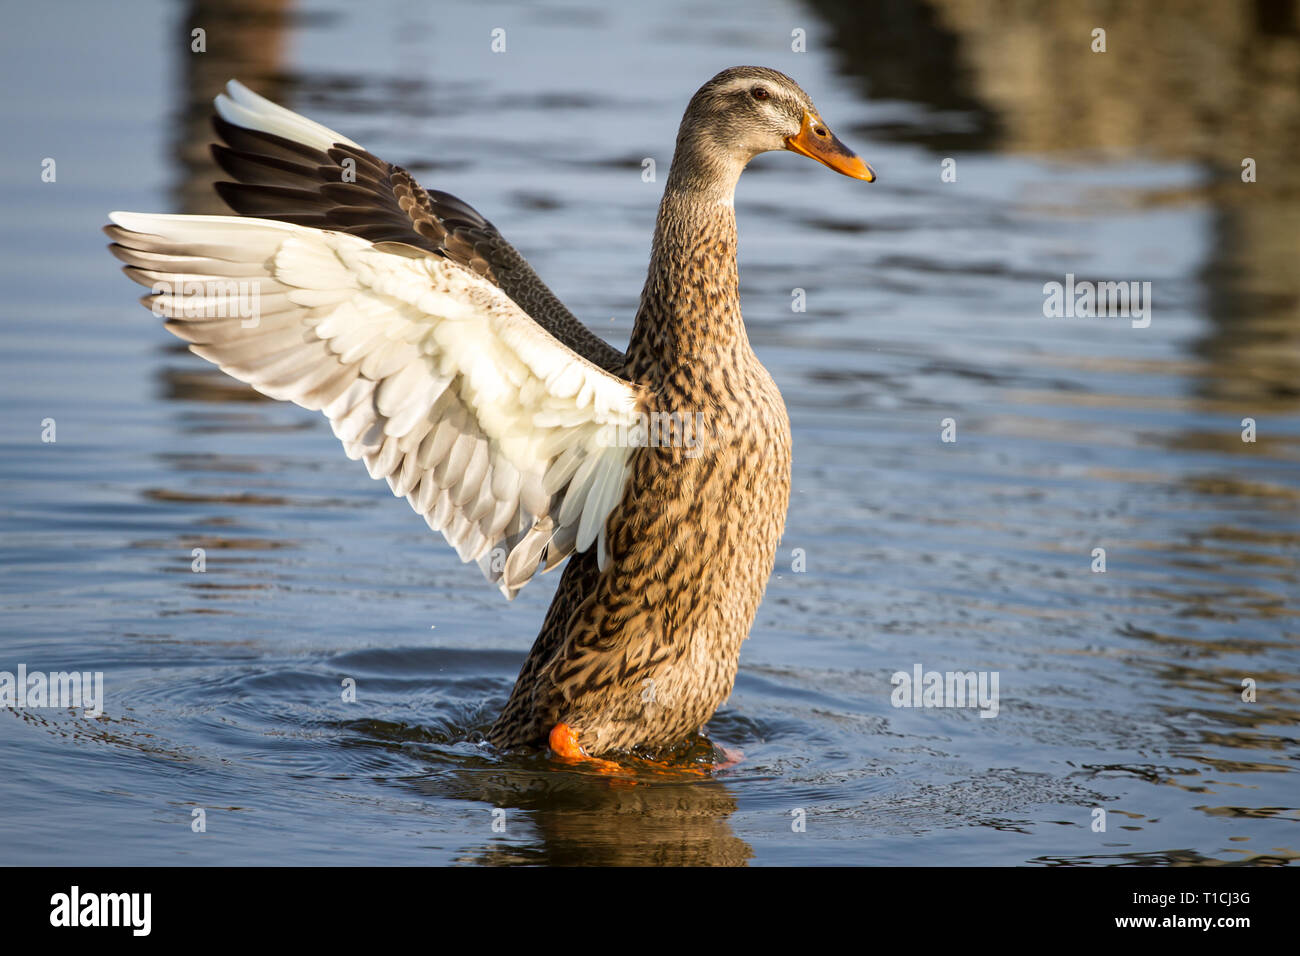 Female duck flapping wings (Anatidae) Stock Photo